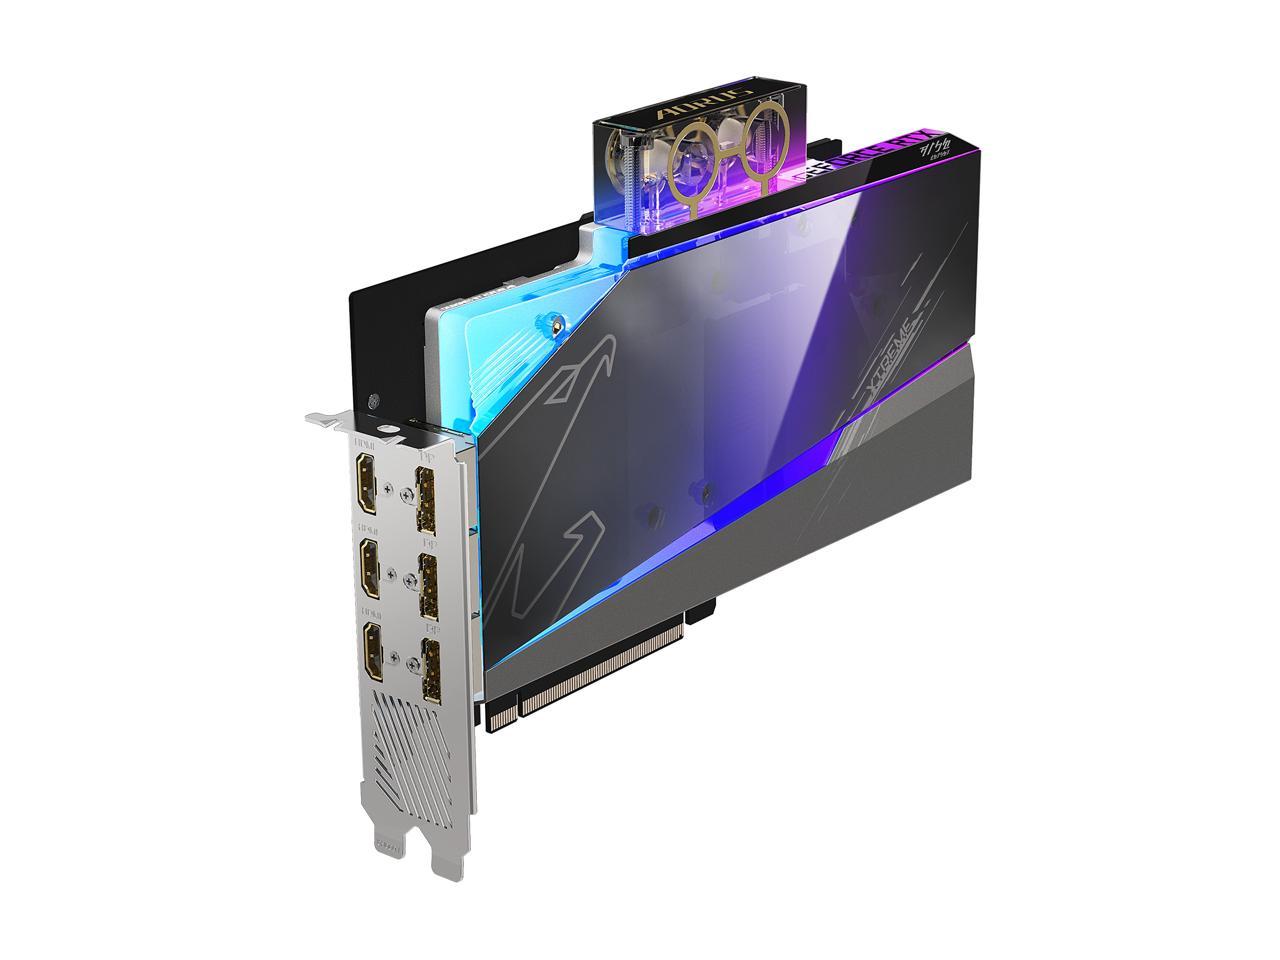 GIGABYTE AORUS GeForce RTX 3080 XTREME WATERFORCE WB 10G Graphics Card, WATERFORCE Water Block Cooling System, 10GB 320-bit GDDR6X, GV-N3080AORUSX WB-10GD Video Card